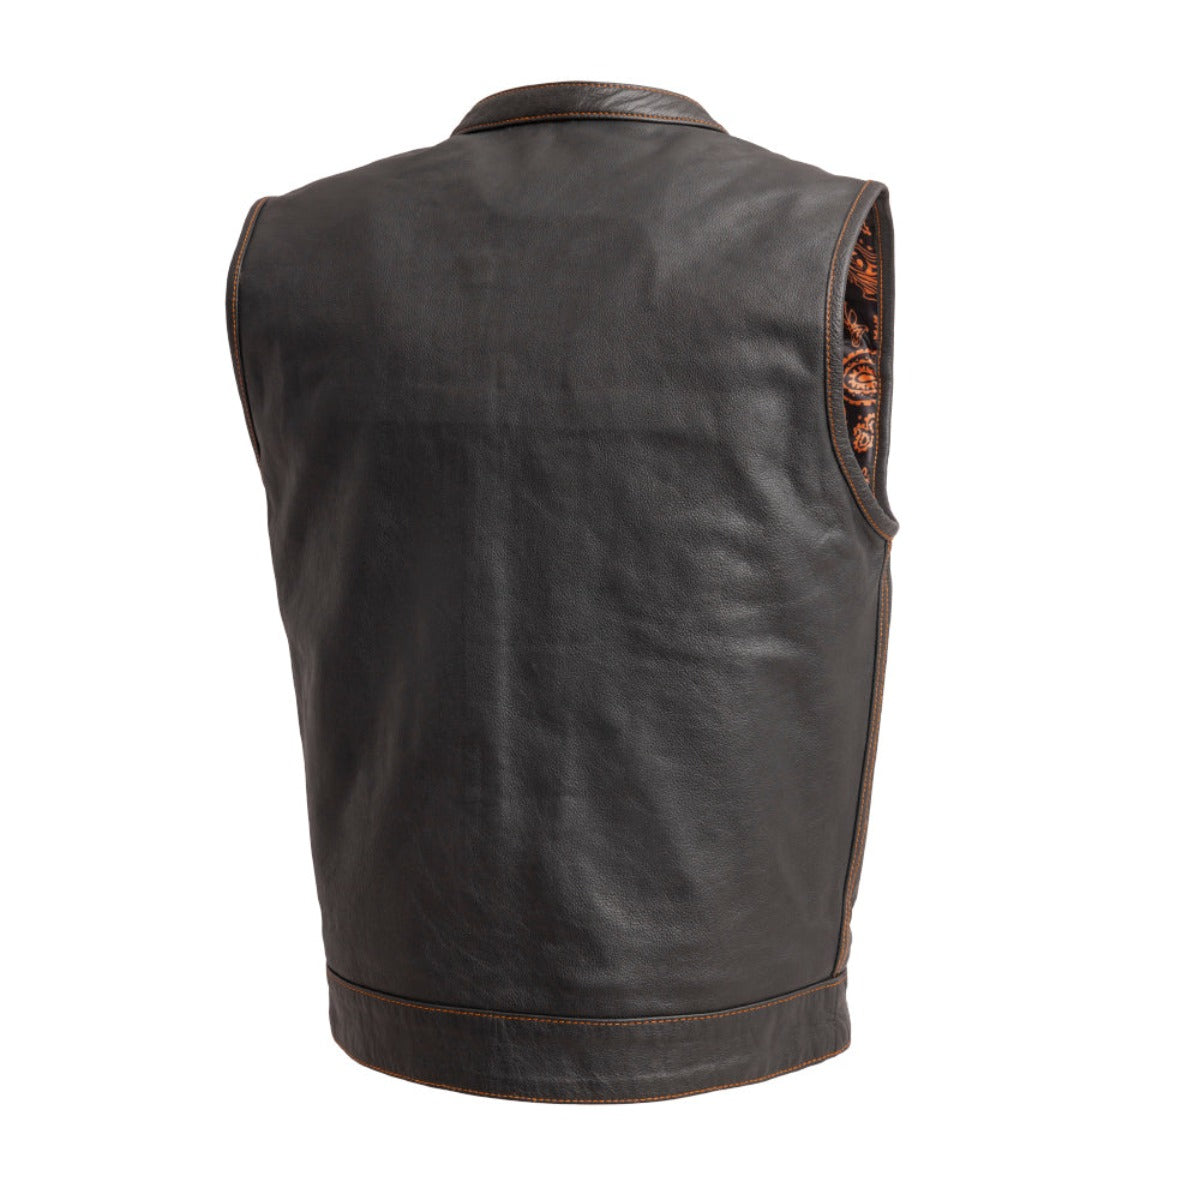 First Manufacturing Men's The Cut Motorcycle Leather Vest, Black/Orange